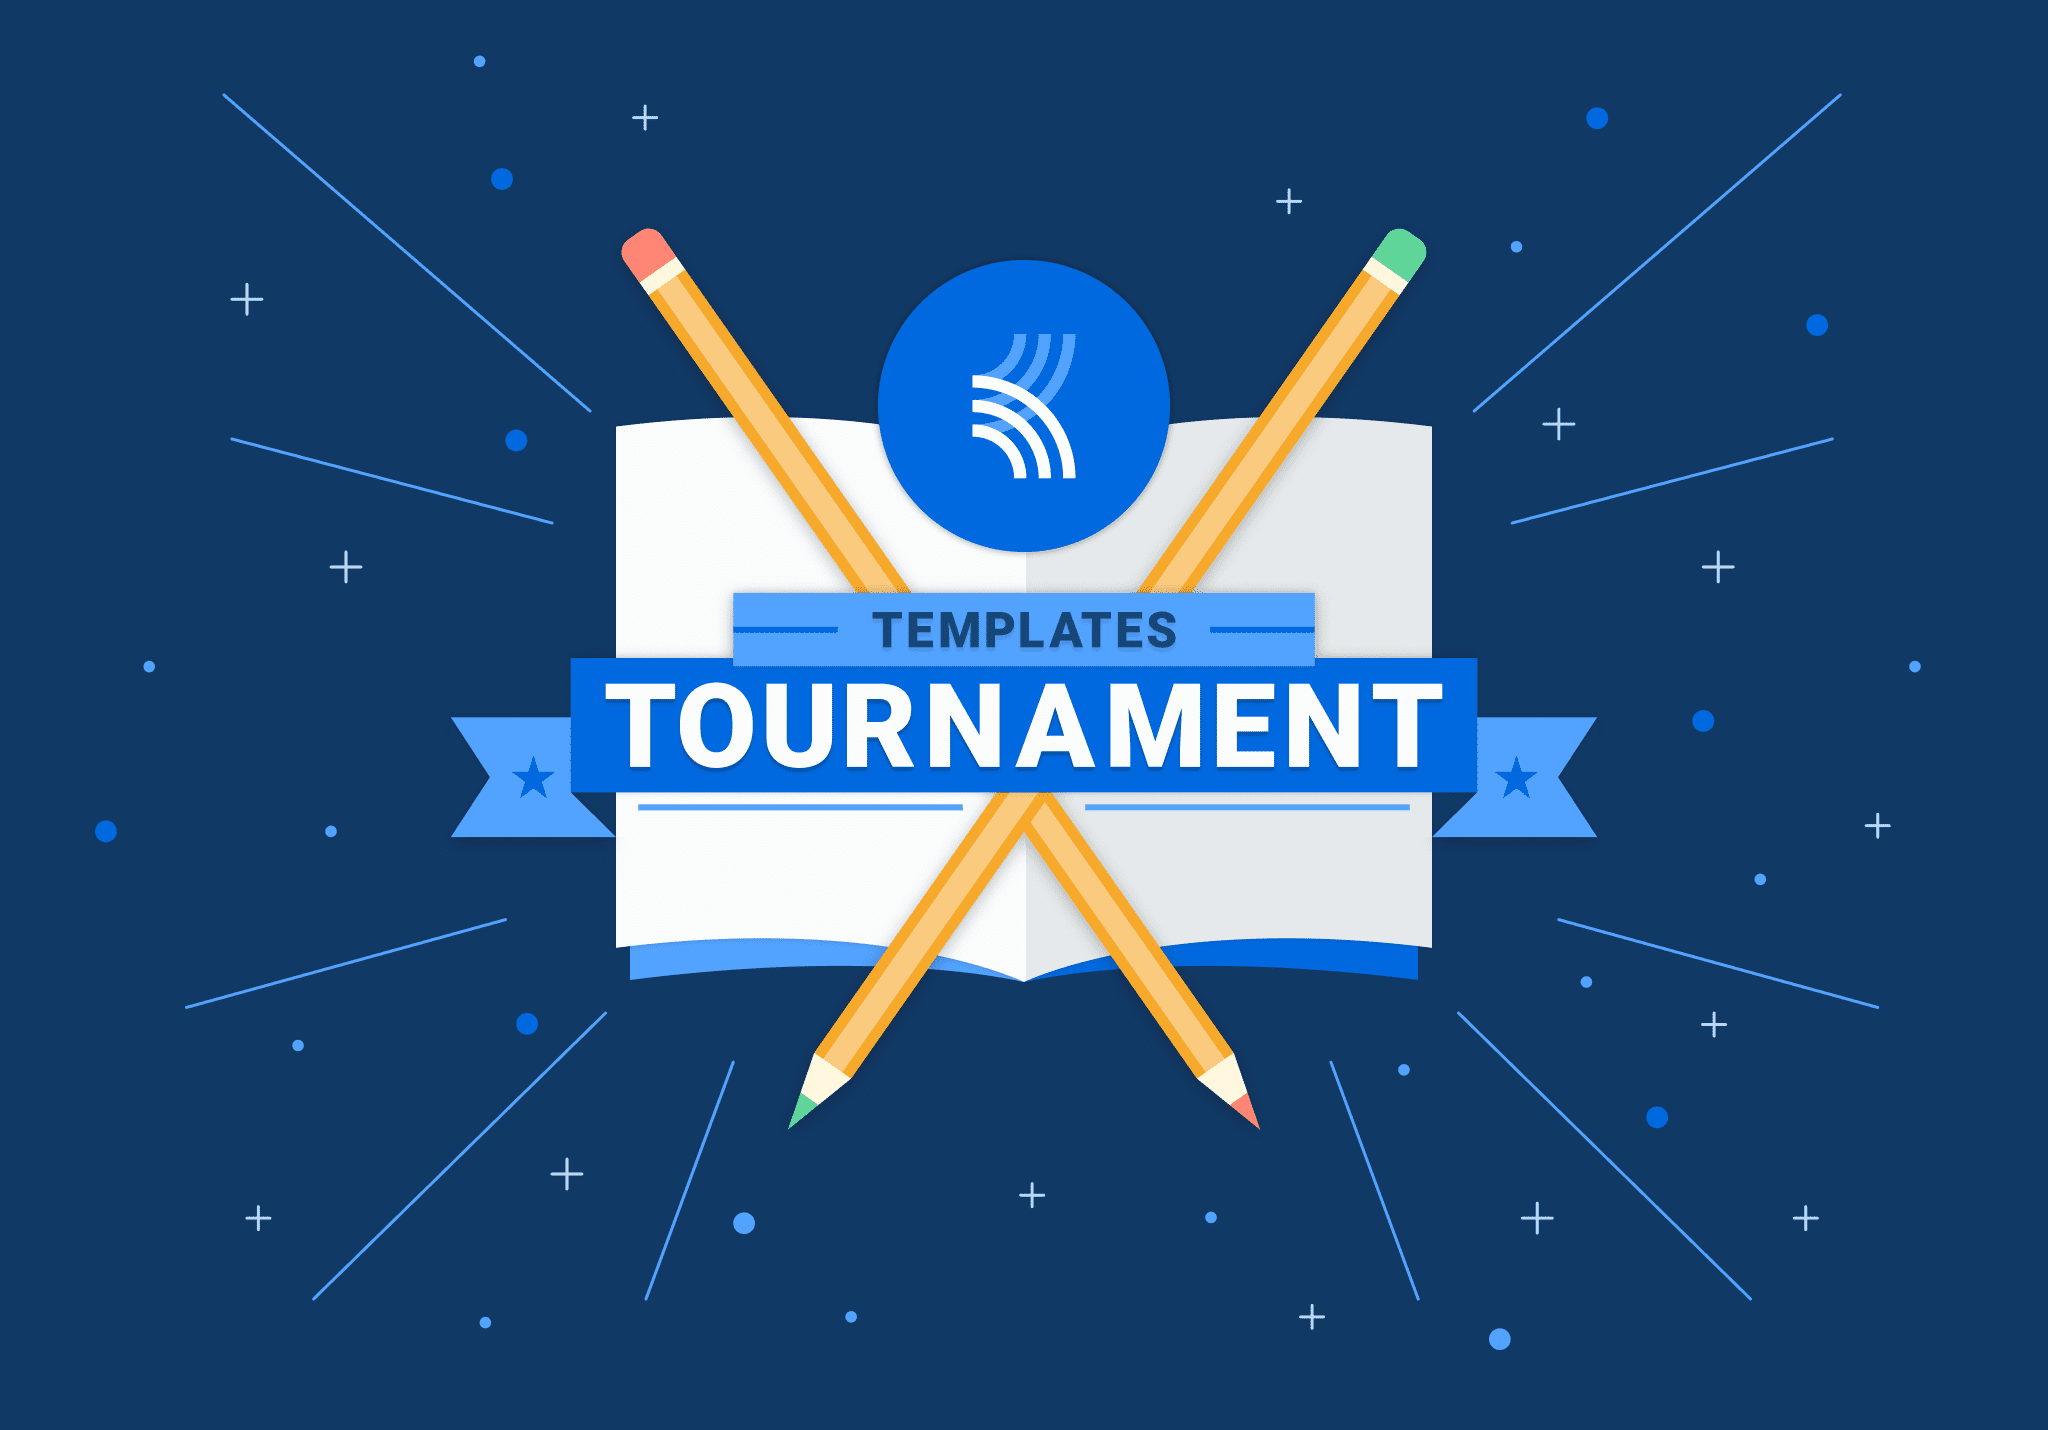 Our first Templates Tournament!